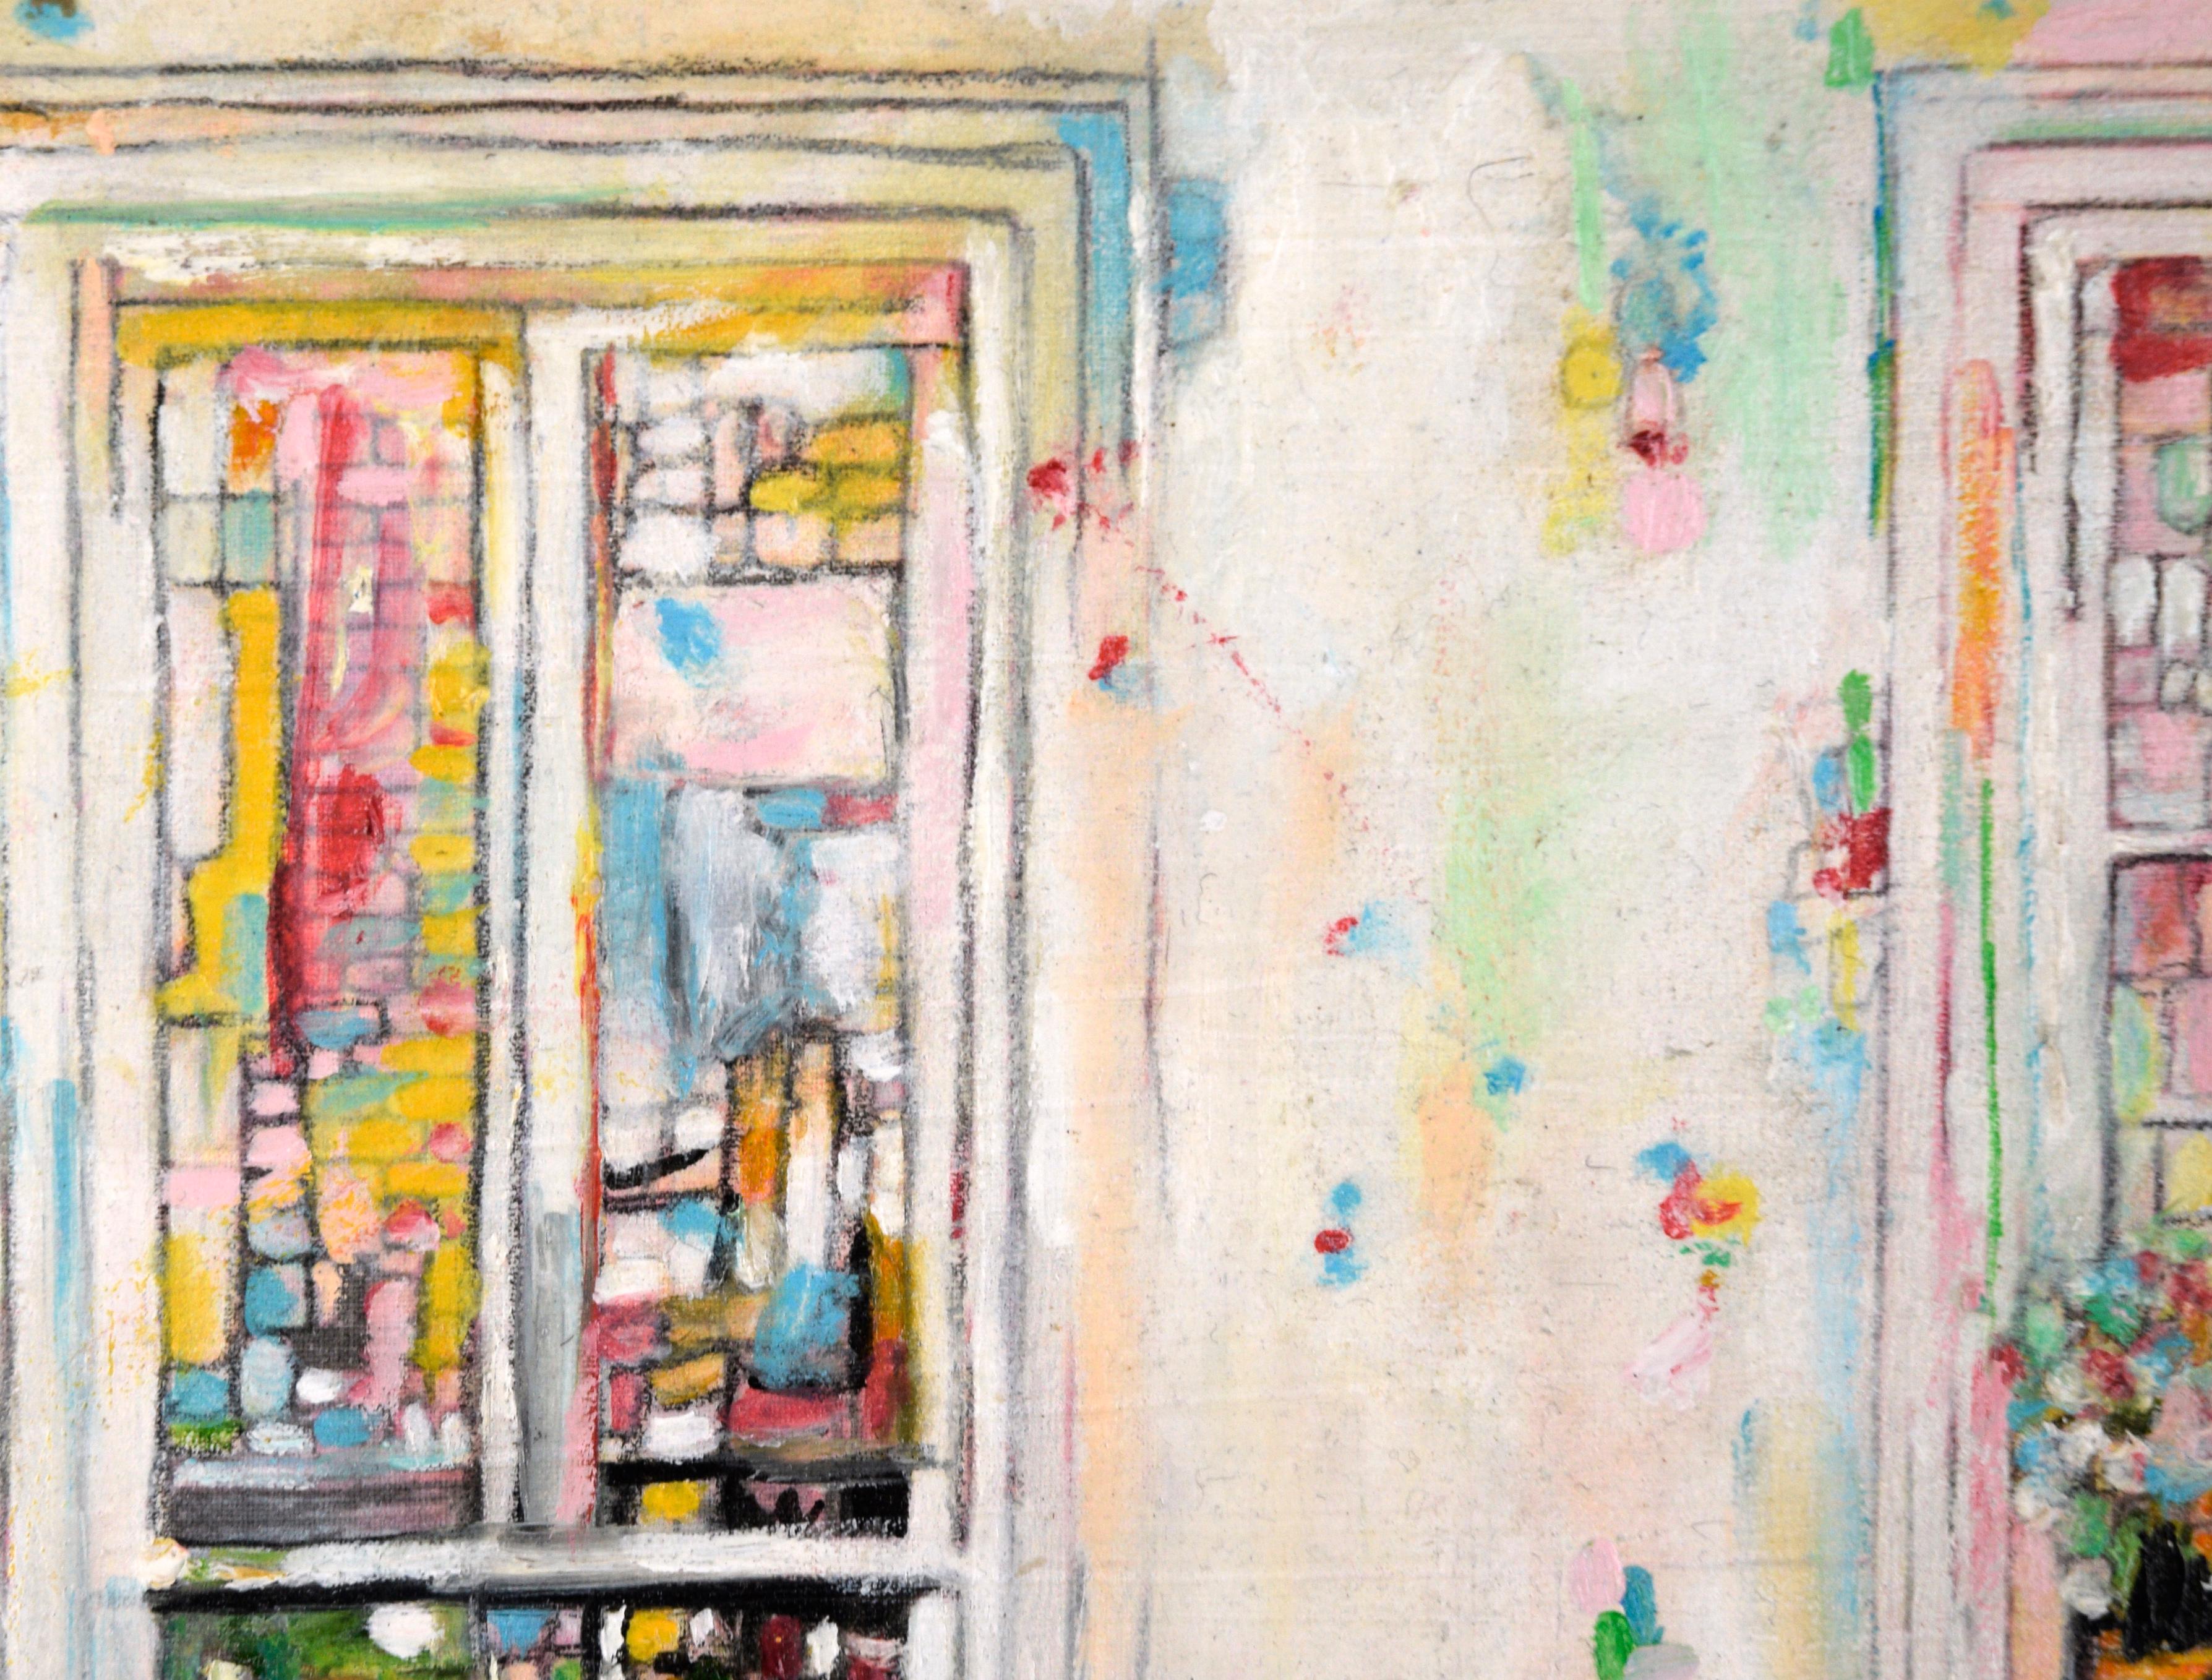 Portuguese Windows #2 - Contemporary Painting by Ana Doolin